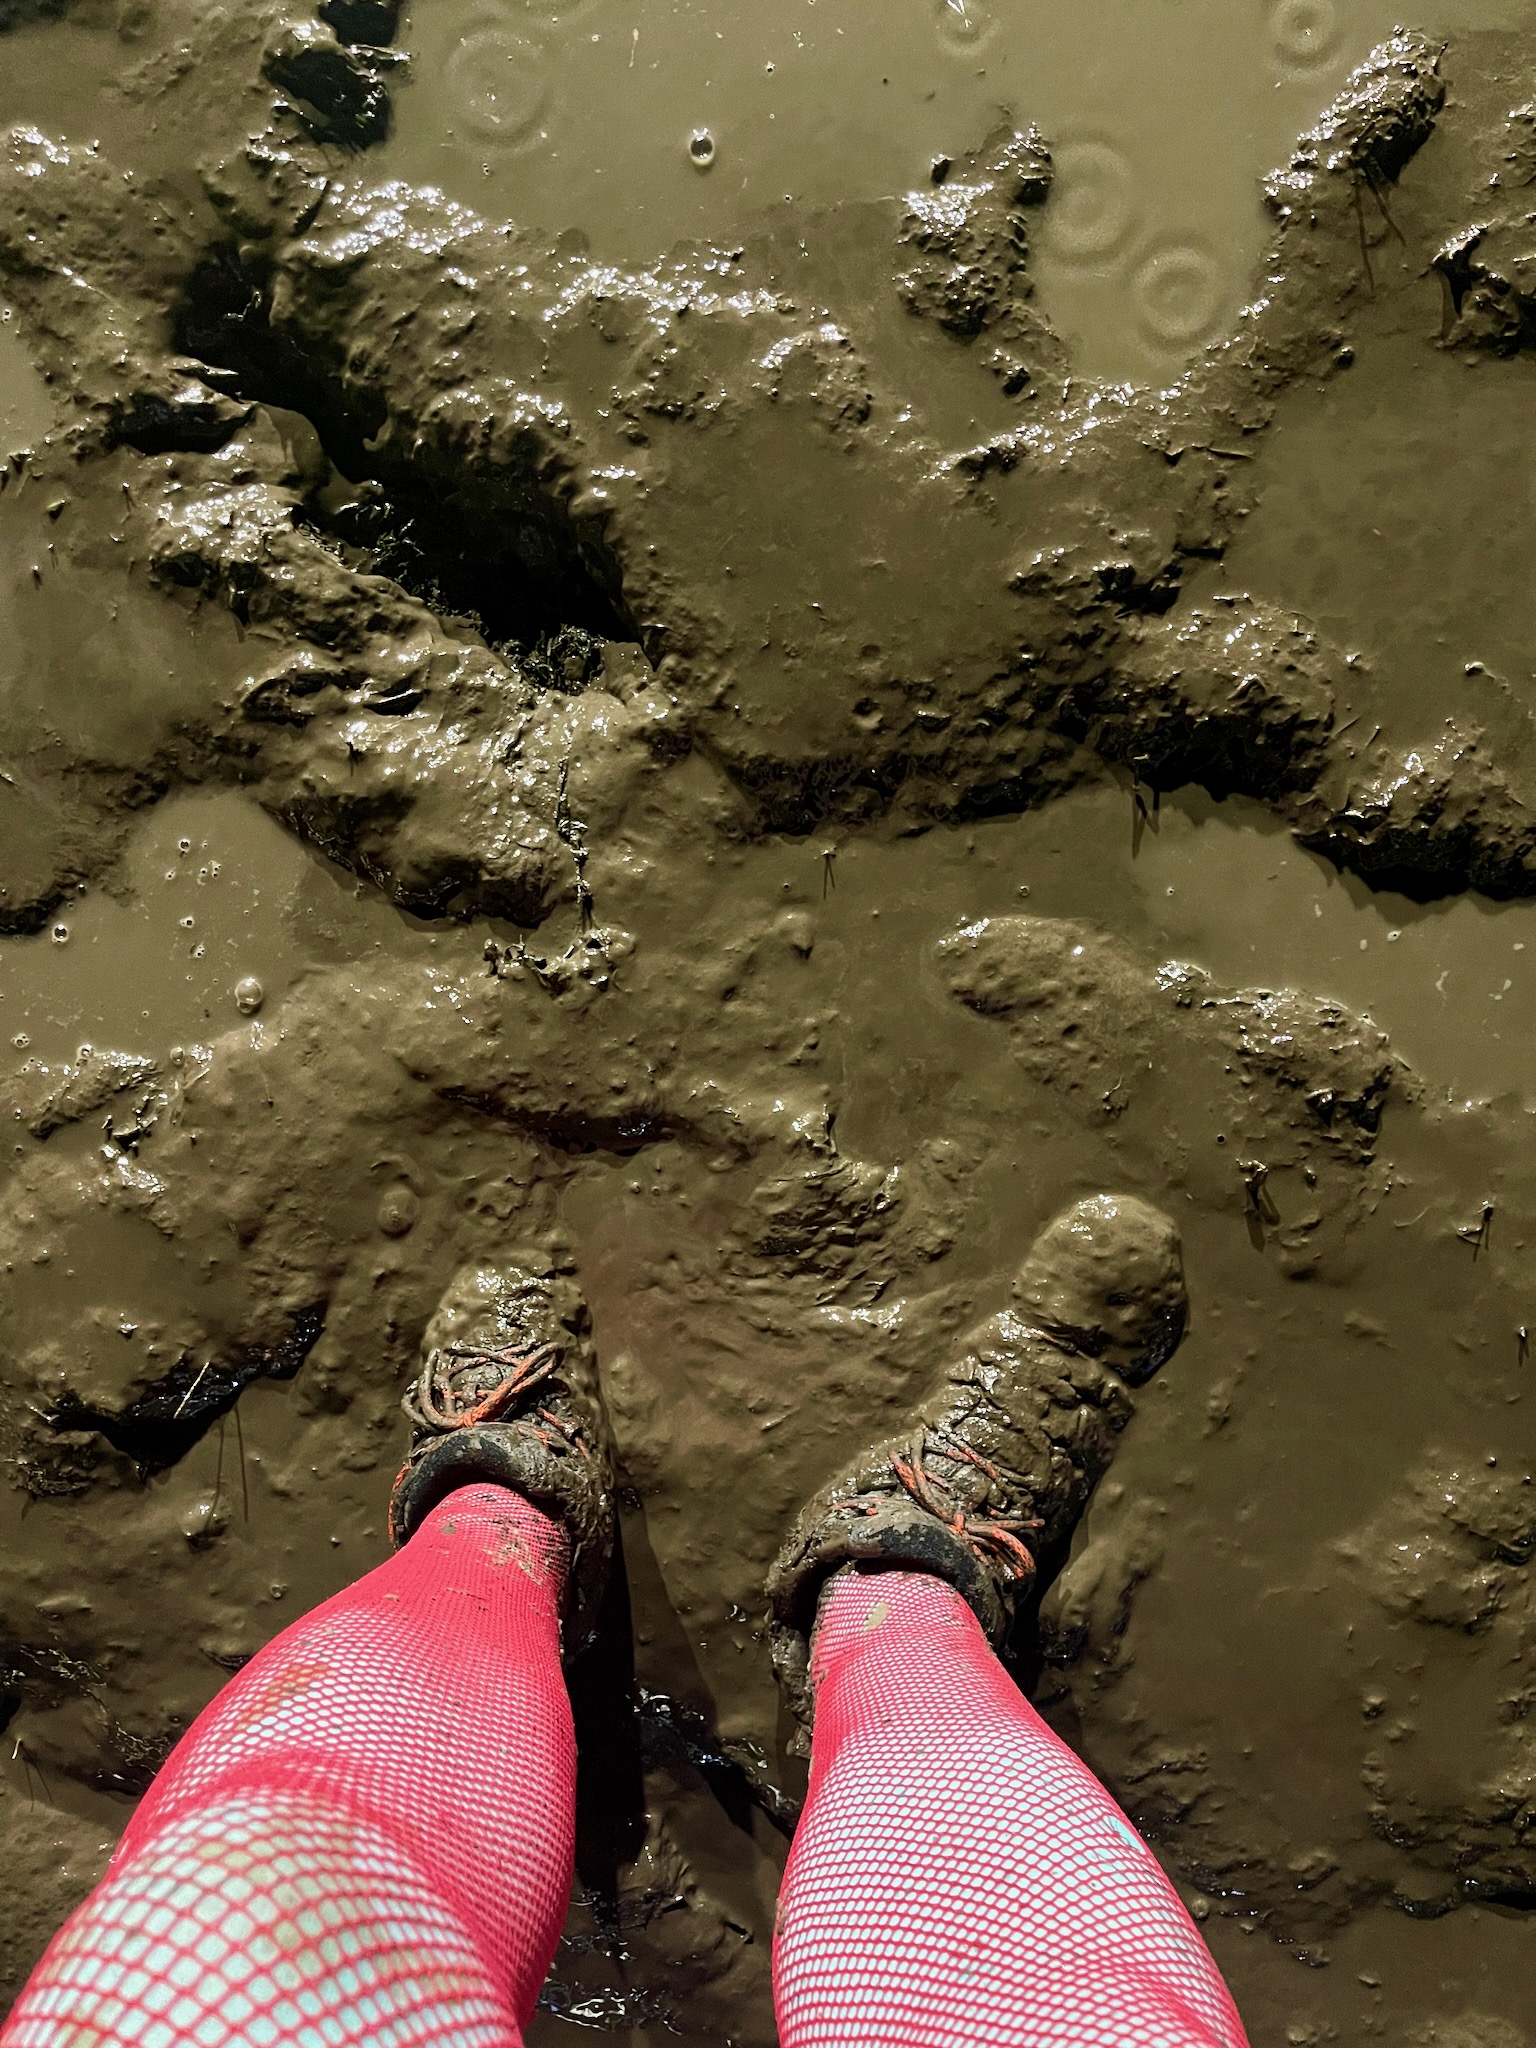 Mud soaked boots sinking into a wet muddy field. The person is wearing red fishnet tights.